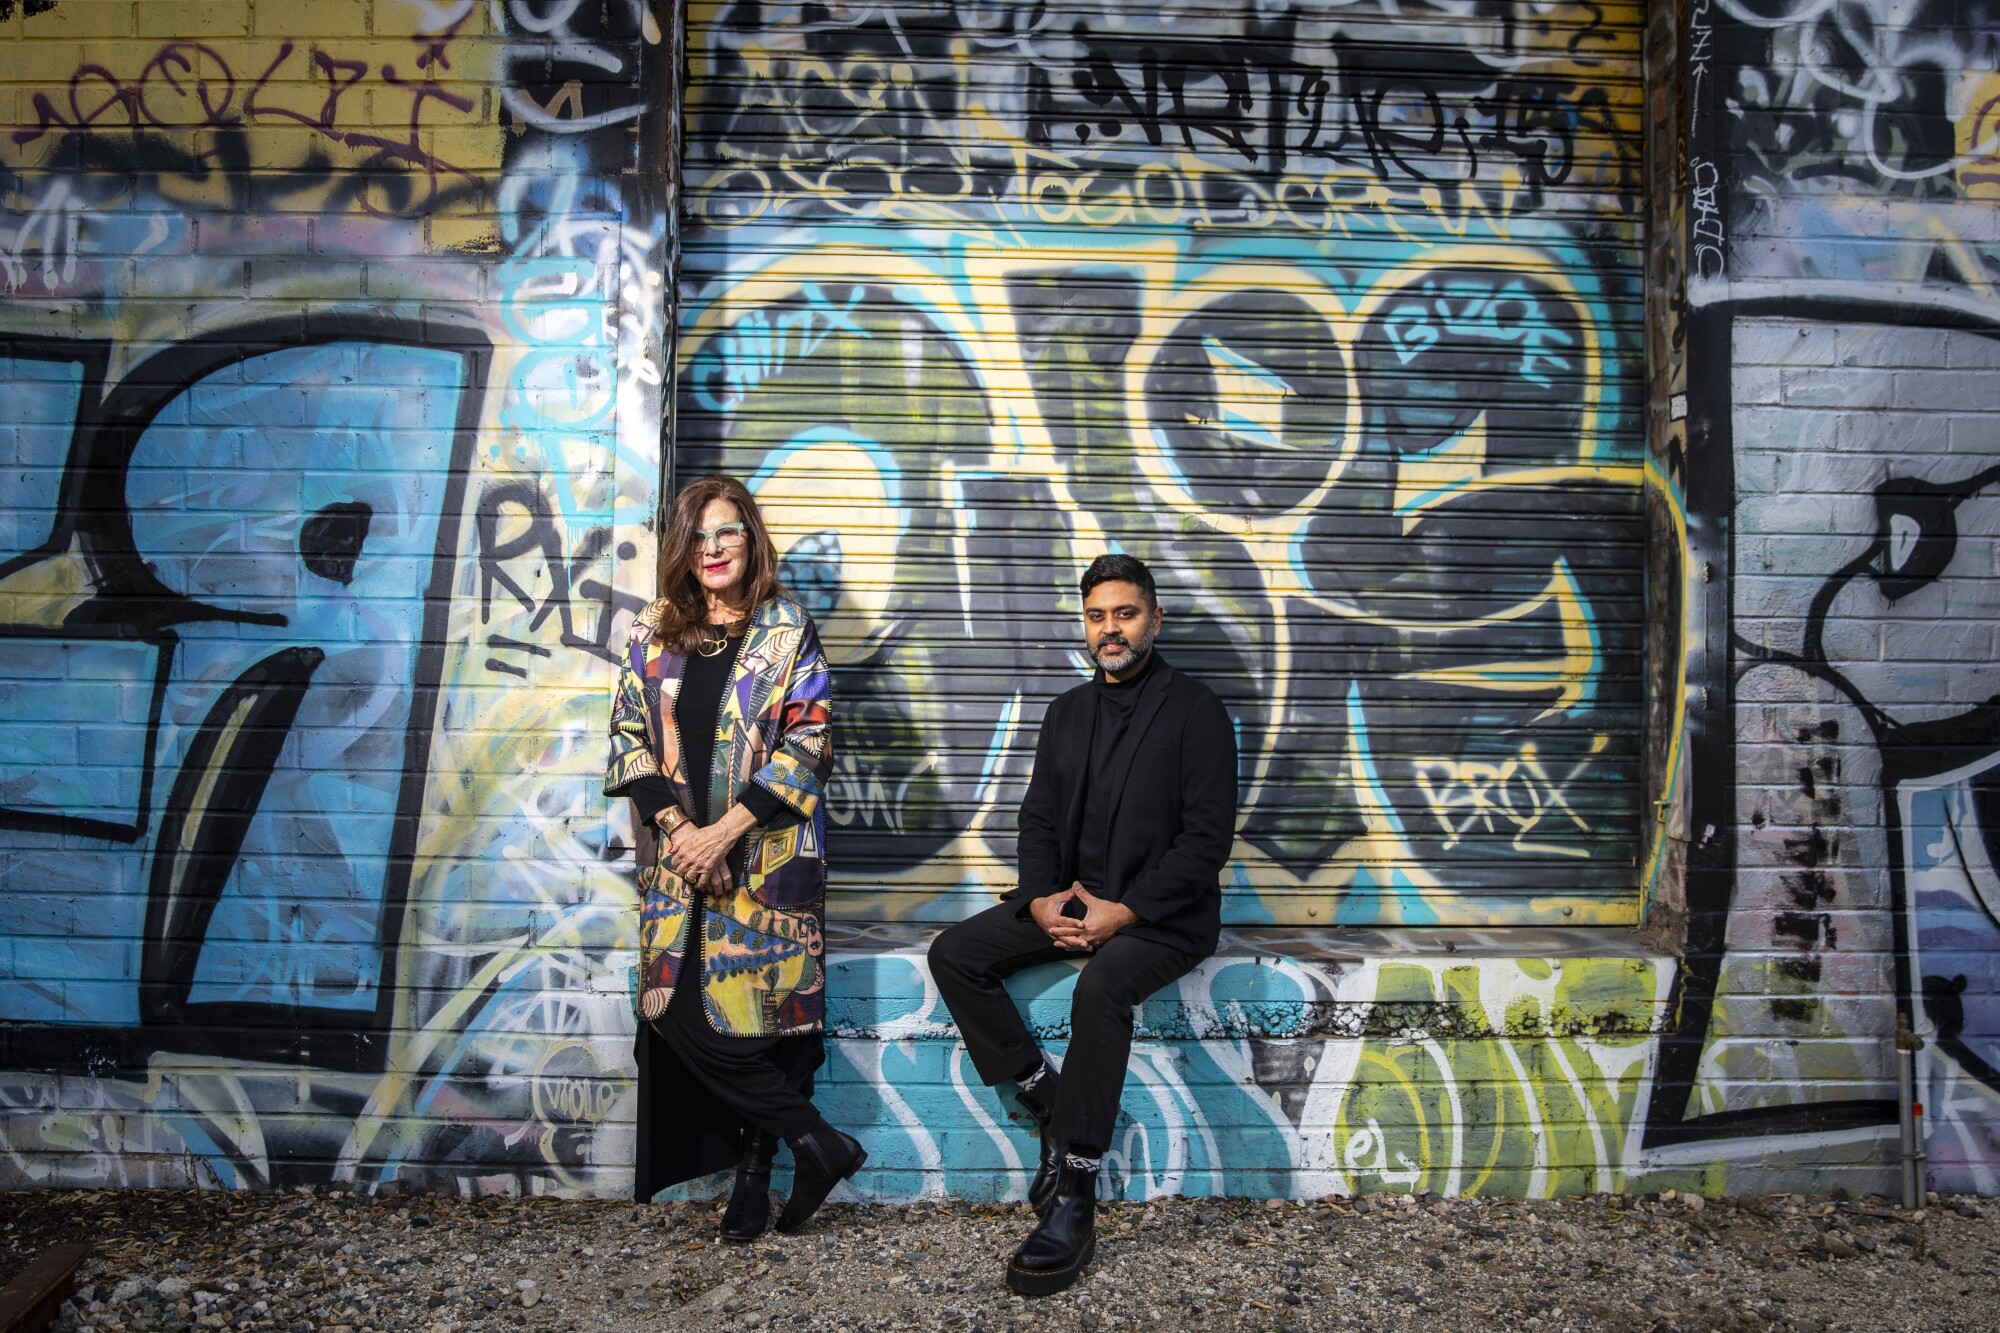 Mia Lehrer, in a bright coat, and Kush Parekh, dressed in black, stand before a graffiti covered wall